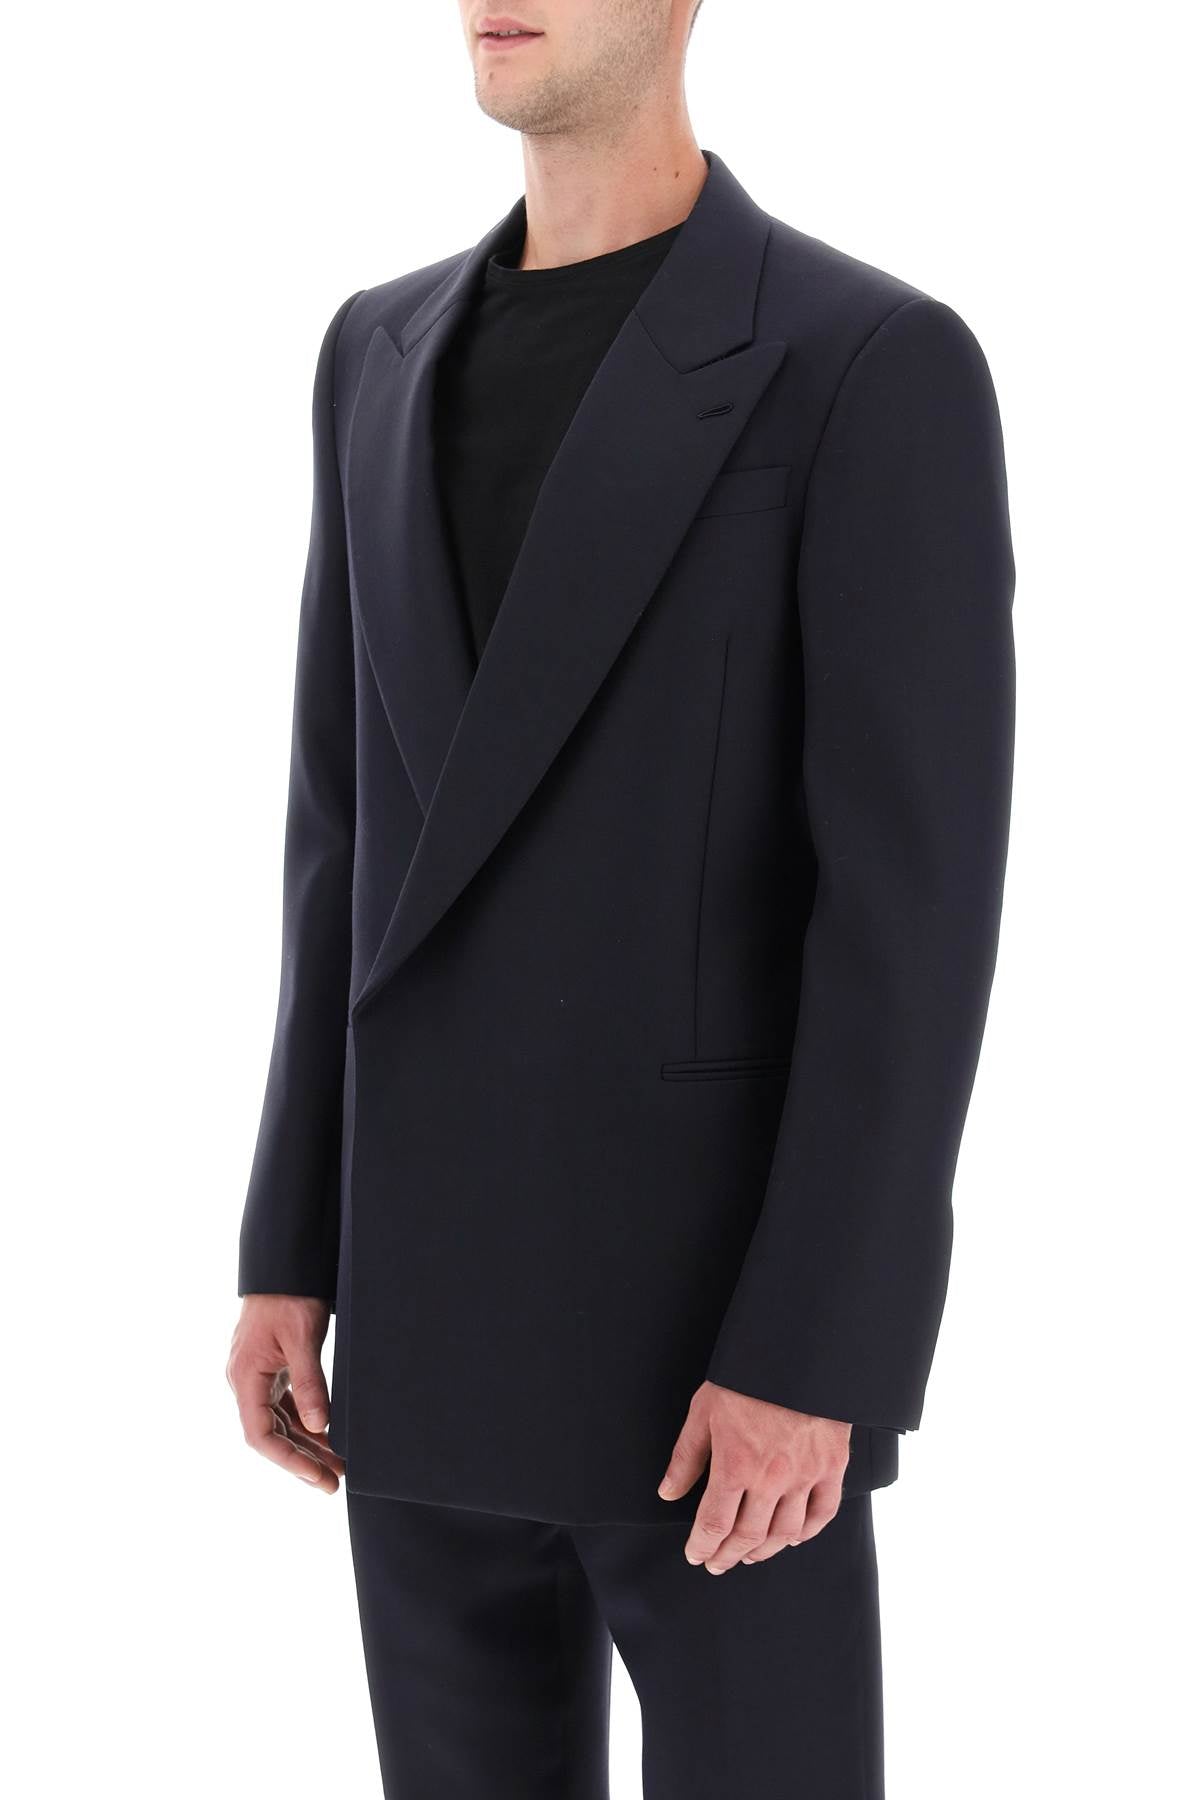 Alexander mcqueen wool and mohair double-breasted blazer-3